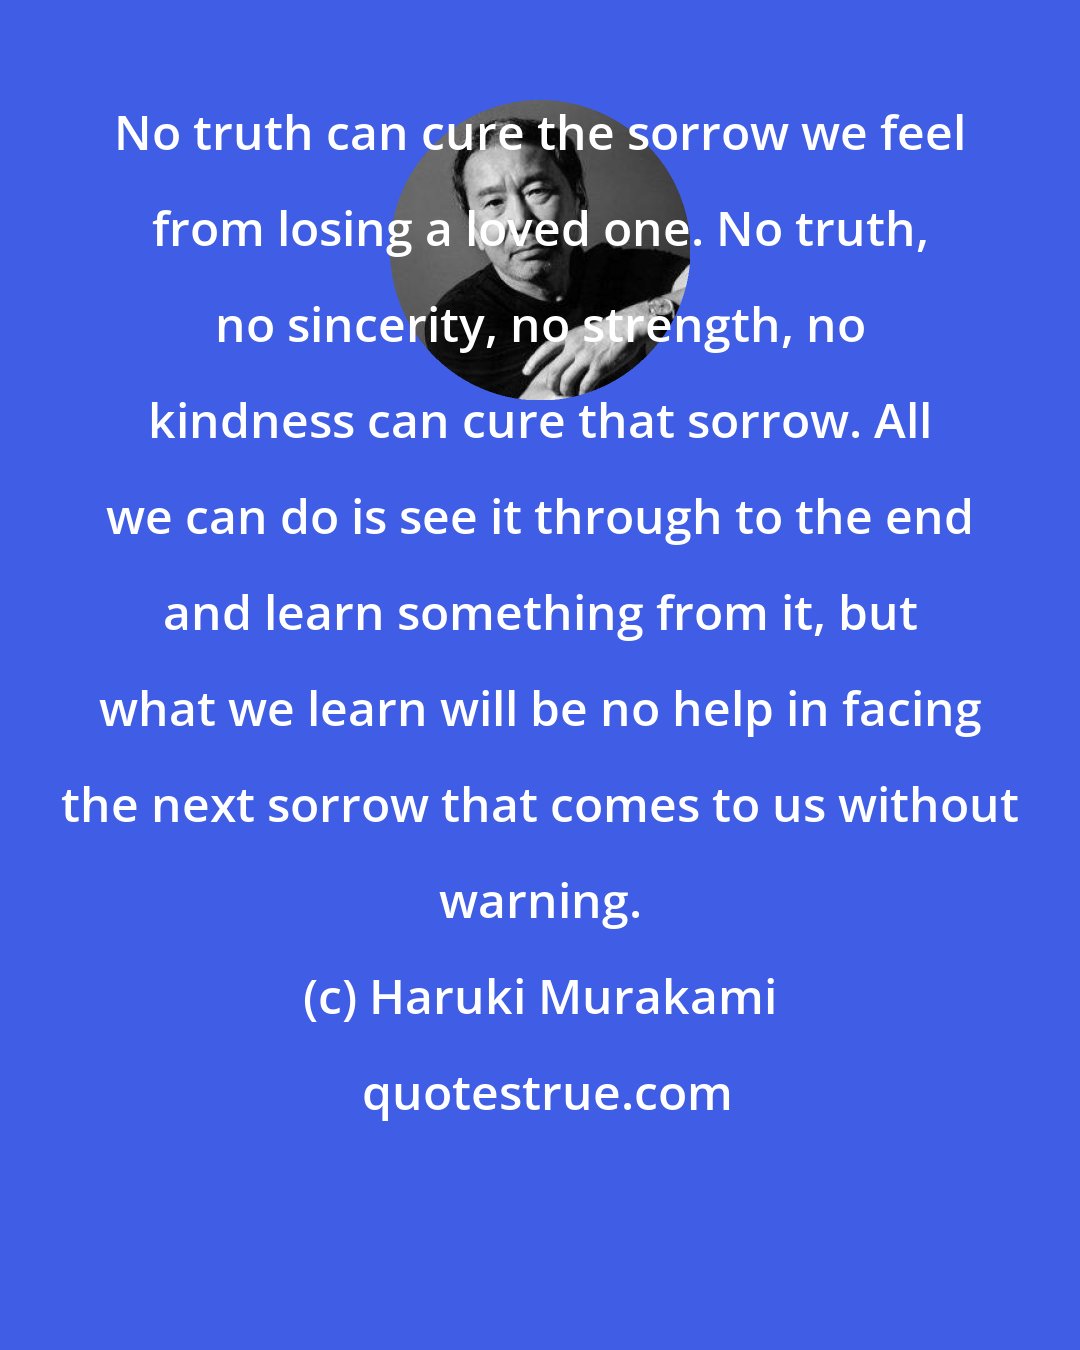 Haruki Murakami: No truth can cure the sorrow we feel from losing a loved one. No truth, no sincerity, no strength, no kindness can cure that sorrow. All we can do is see it through to the end and learn something from it, but what we learn will be no help in facing the next sorrow that comes to us without warning.